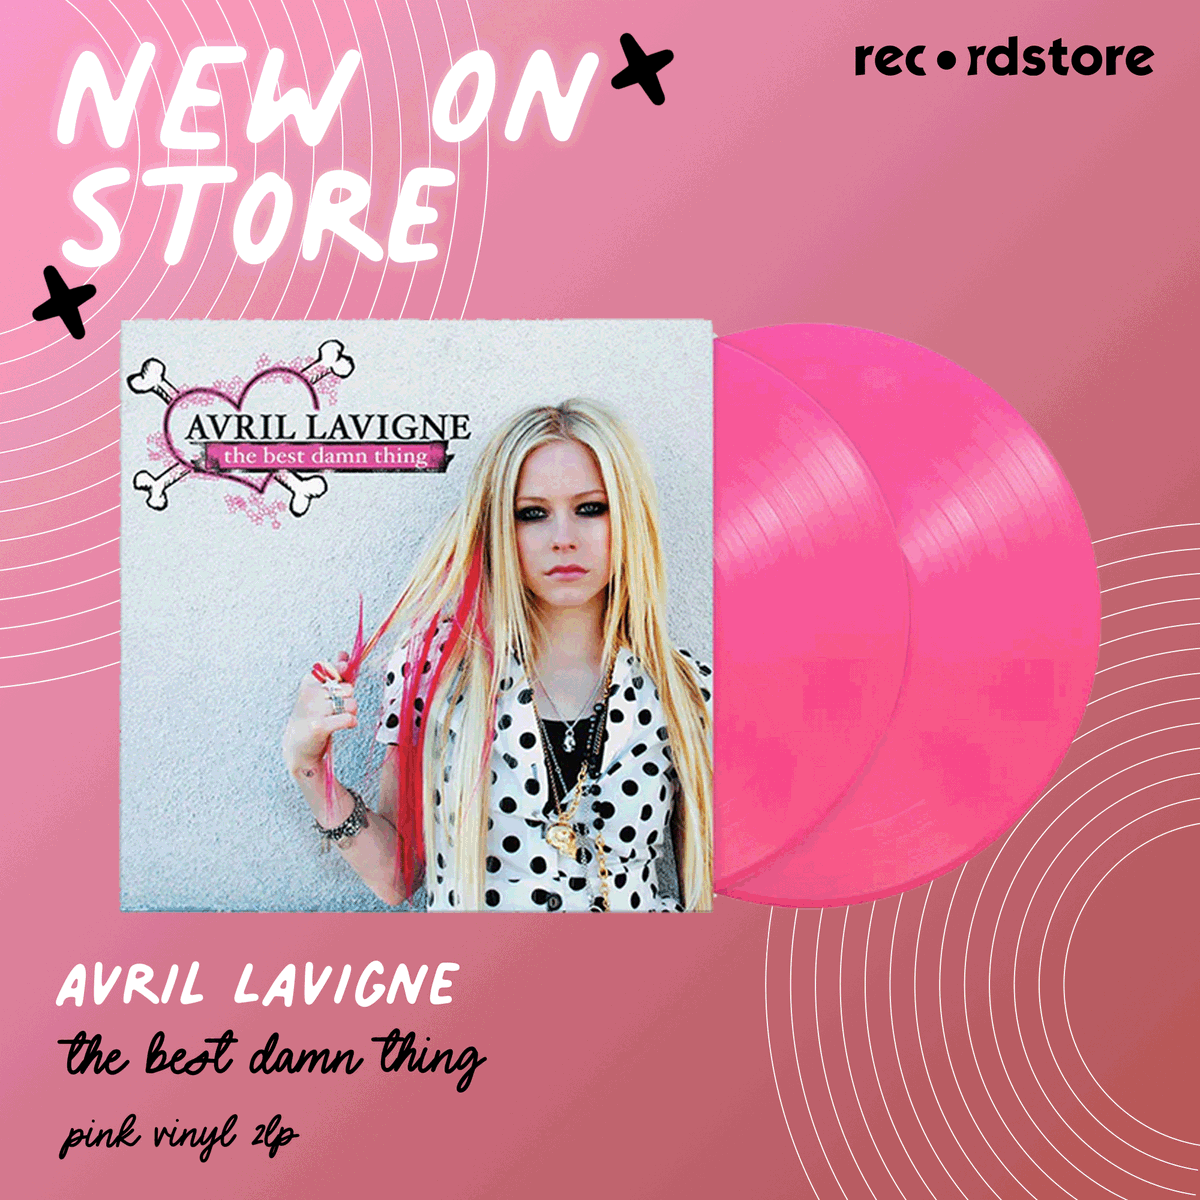 NEW | @AvrilLavigne - Limited Vinyl Editions

Just arrived, a long-awaited re-stock of Avril Lavigne's discography on limited vinyl including her iconic debut 'Let Go' her first-ever career spanning greatest hits collection!

Shop now >> lnk.to/Cj0wEvTP